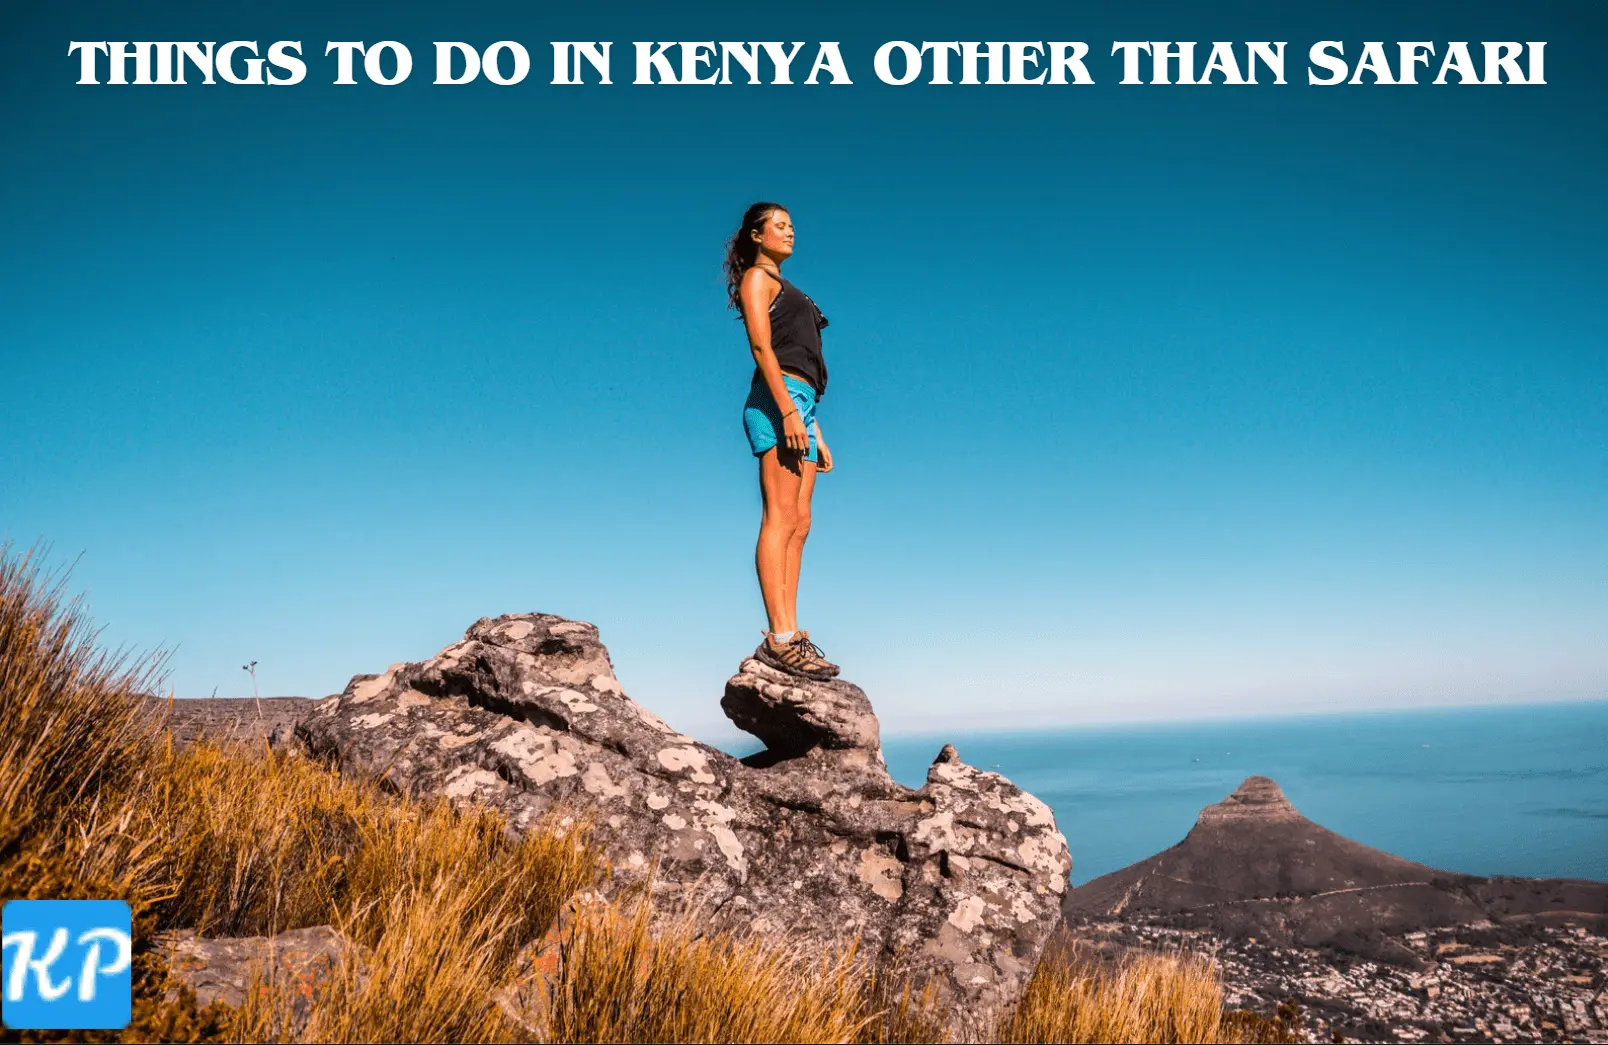 35 Things to Do in Kenya Other than Safari